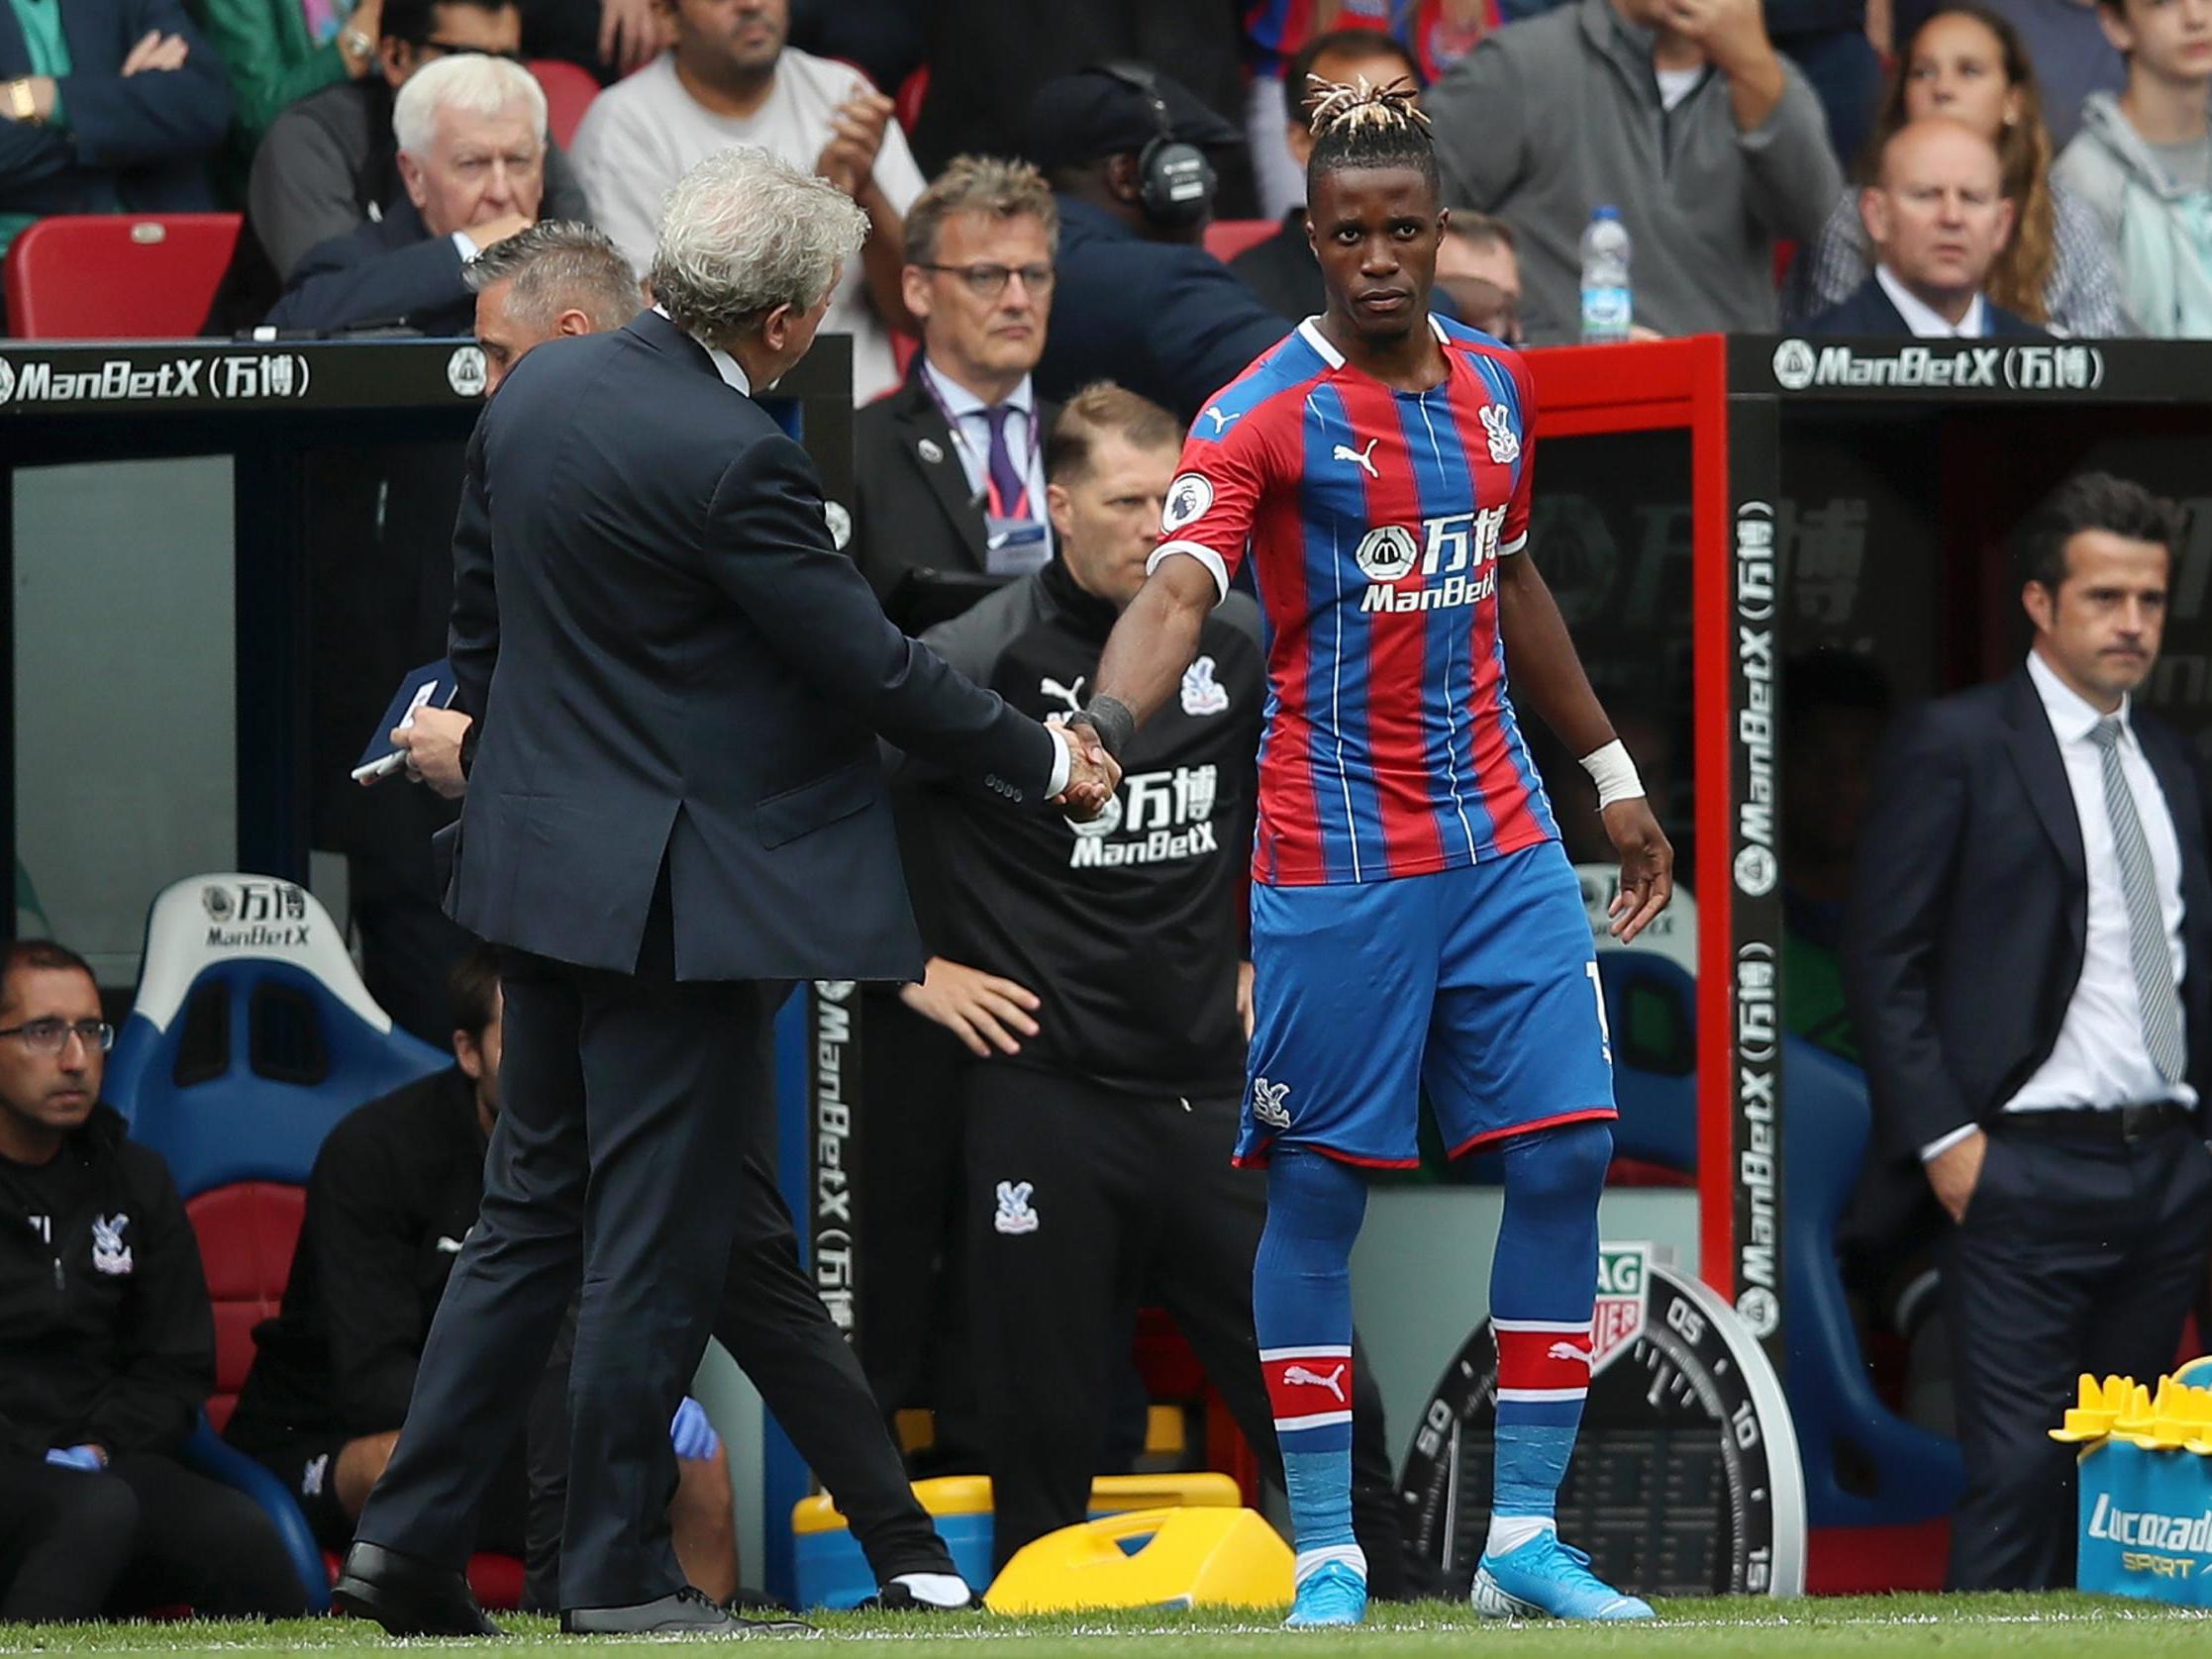 Wilfried Zaha played 30 minutes against Everton